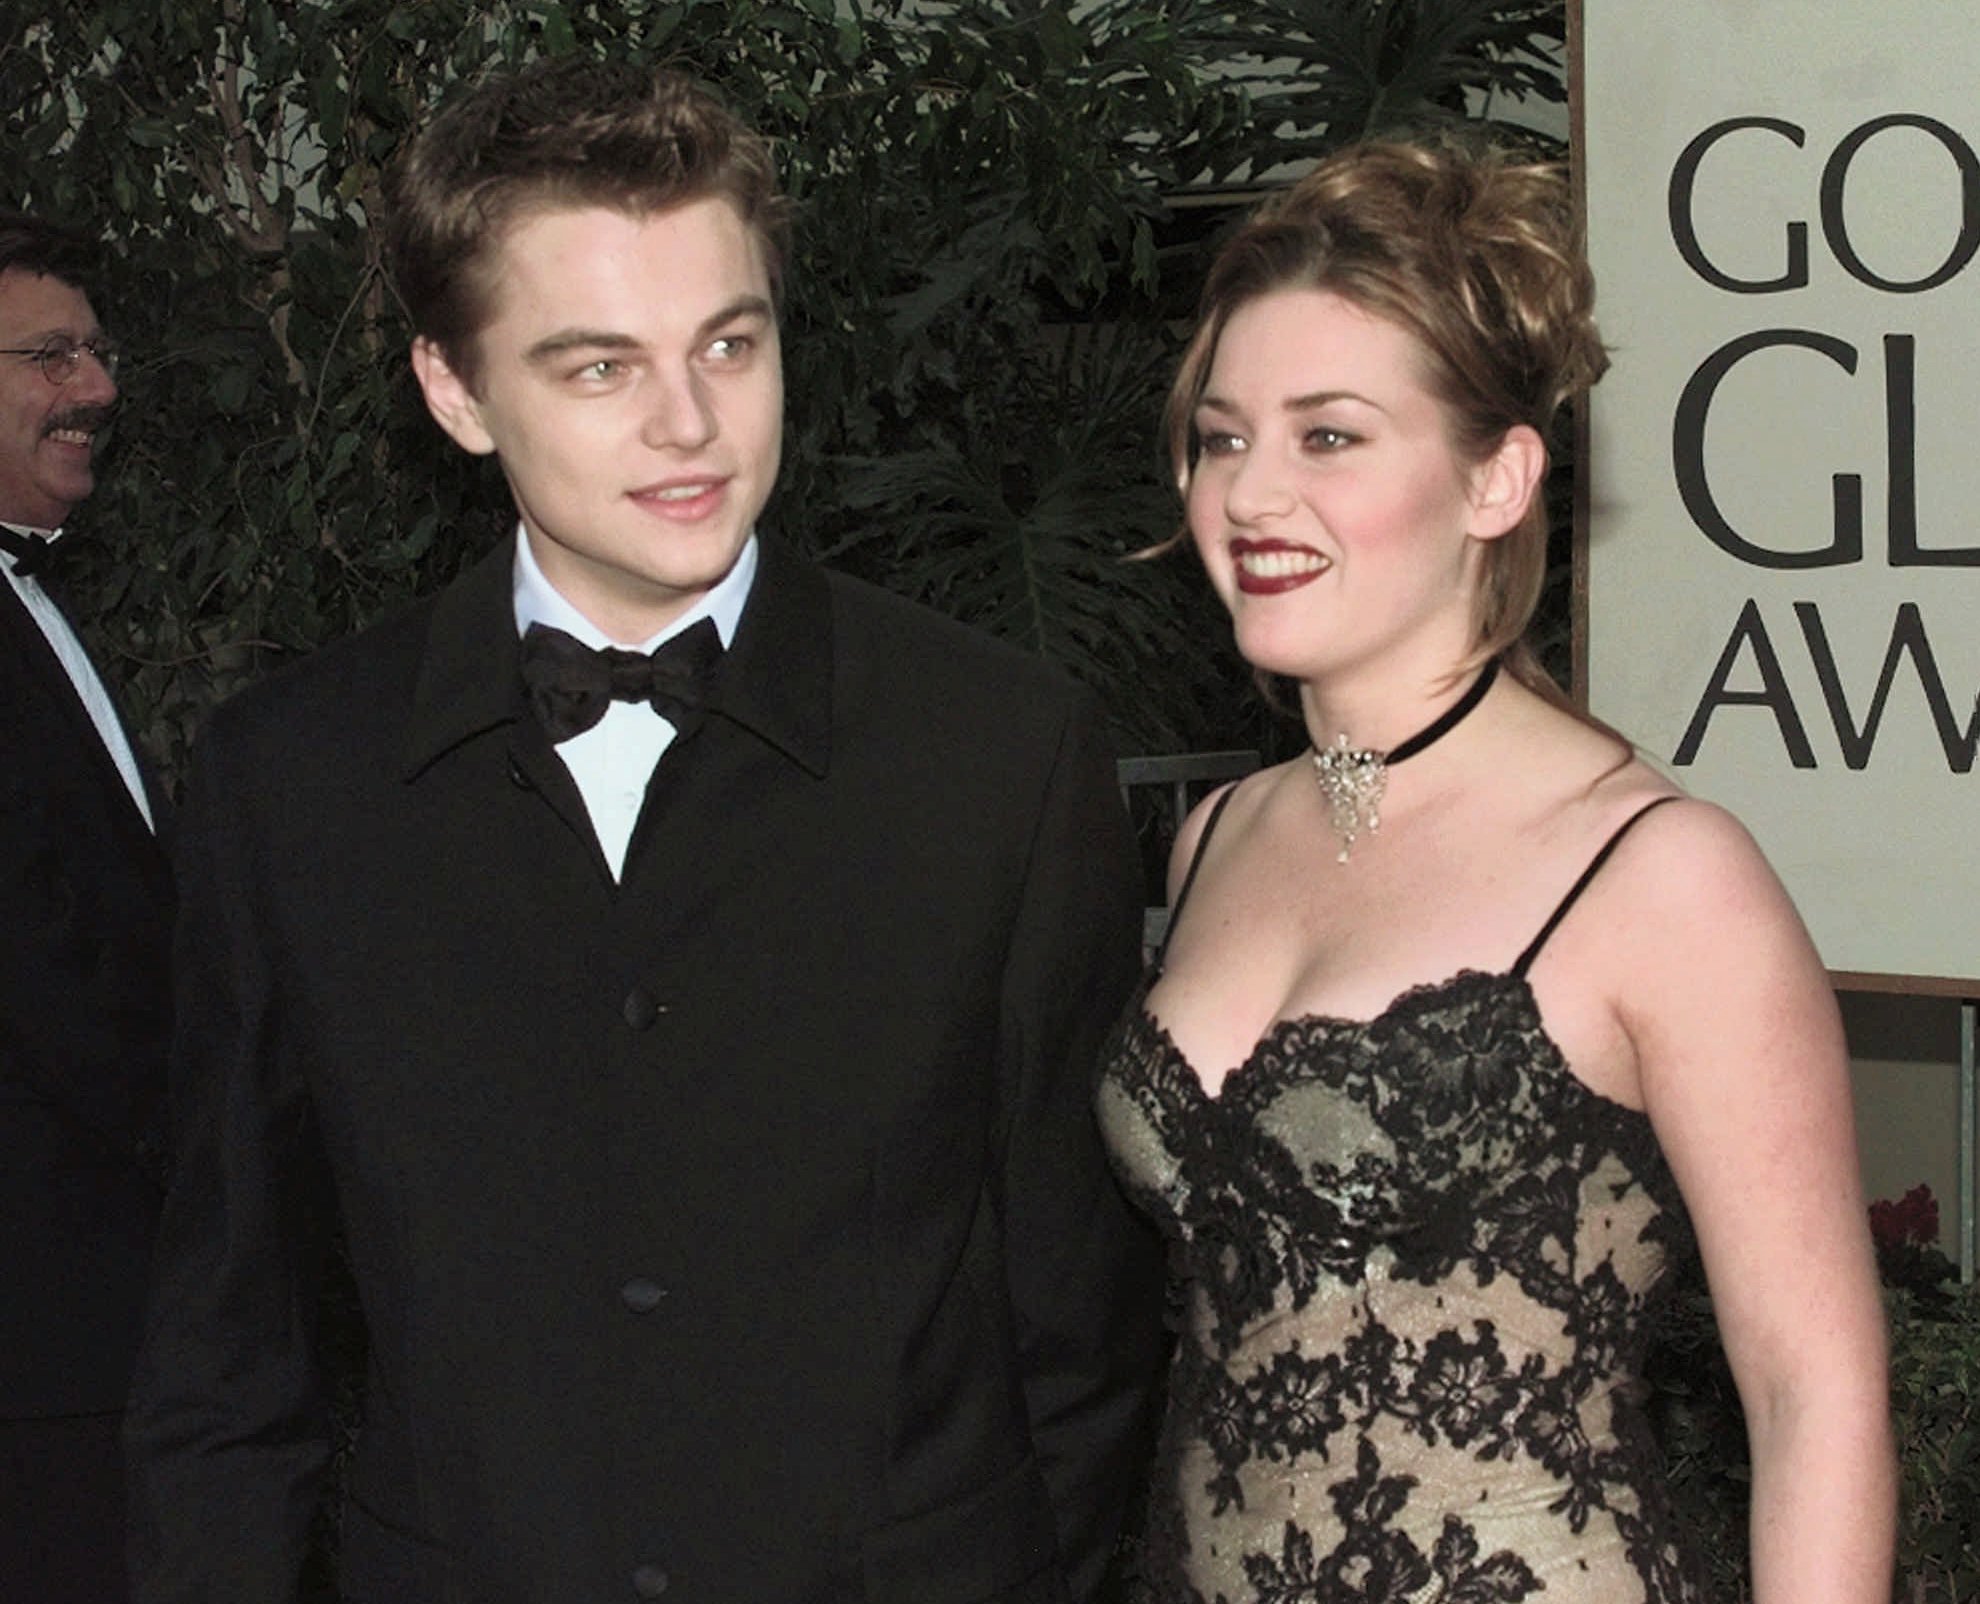 PHOTO: Leonardo DiCaprio and Kate Winslet arrive at the 55th Annual Golden Globe Awards in Beverly Hills, Calif., on Jan. 18, 1998. 